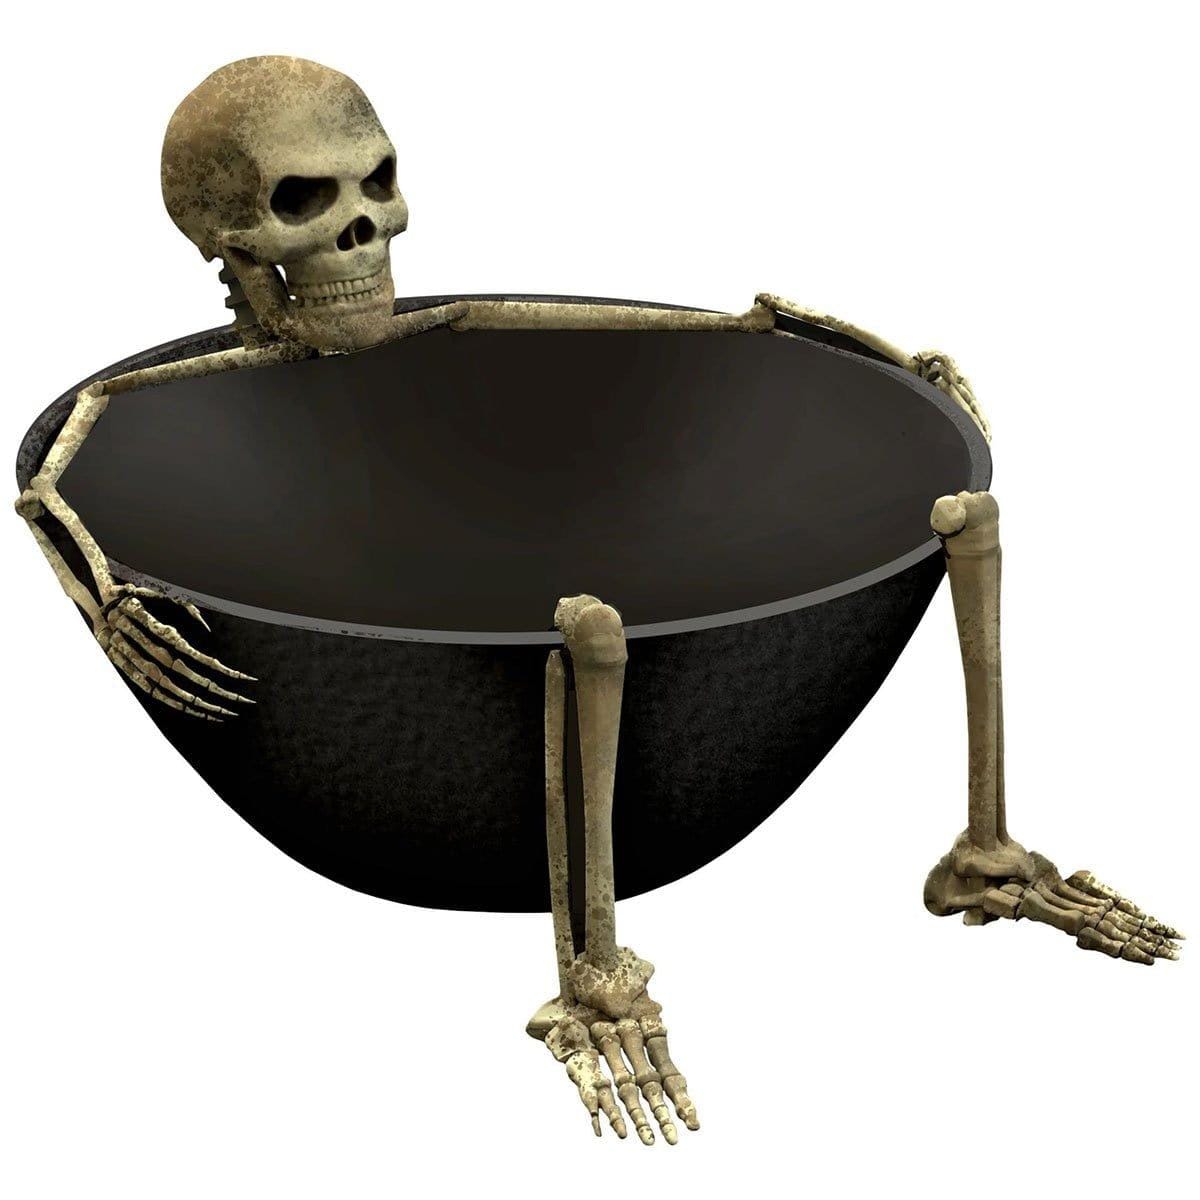 Buy Halloween Skeleton Bowl sold at Party Expert